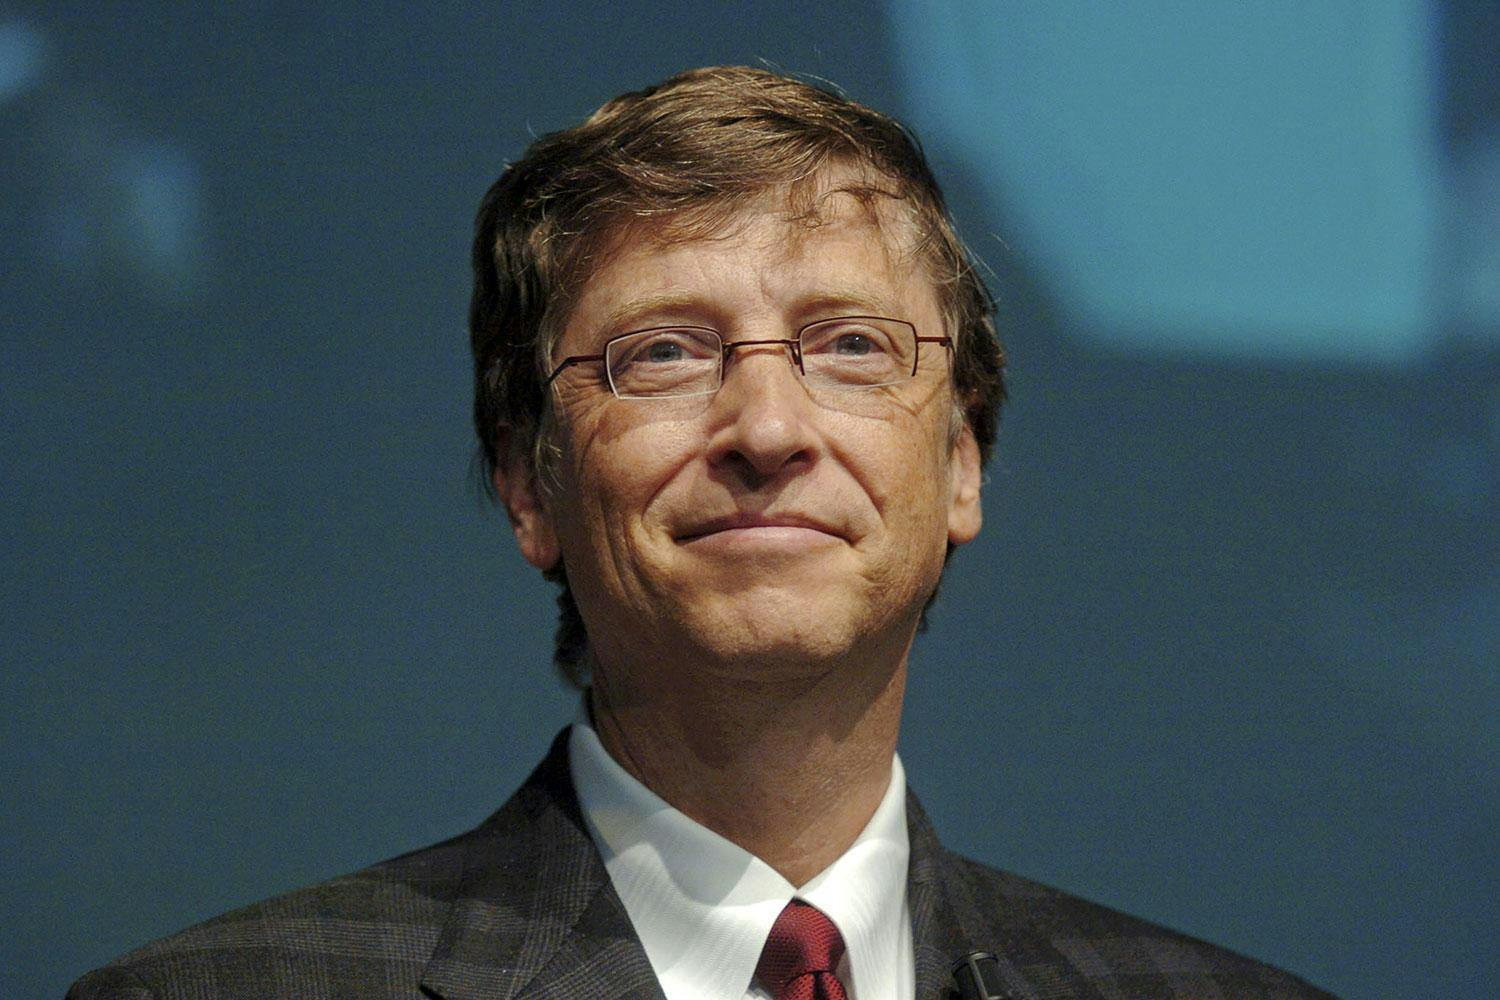 Bill Gates says the AI dream is arriving